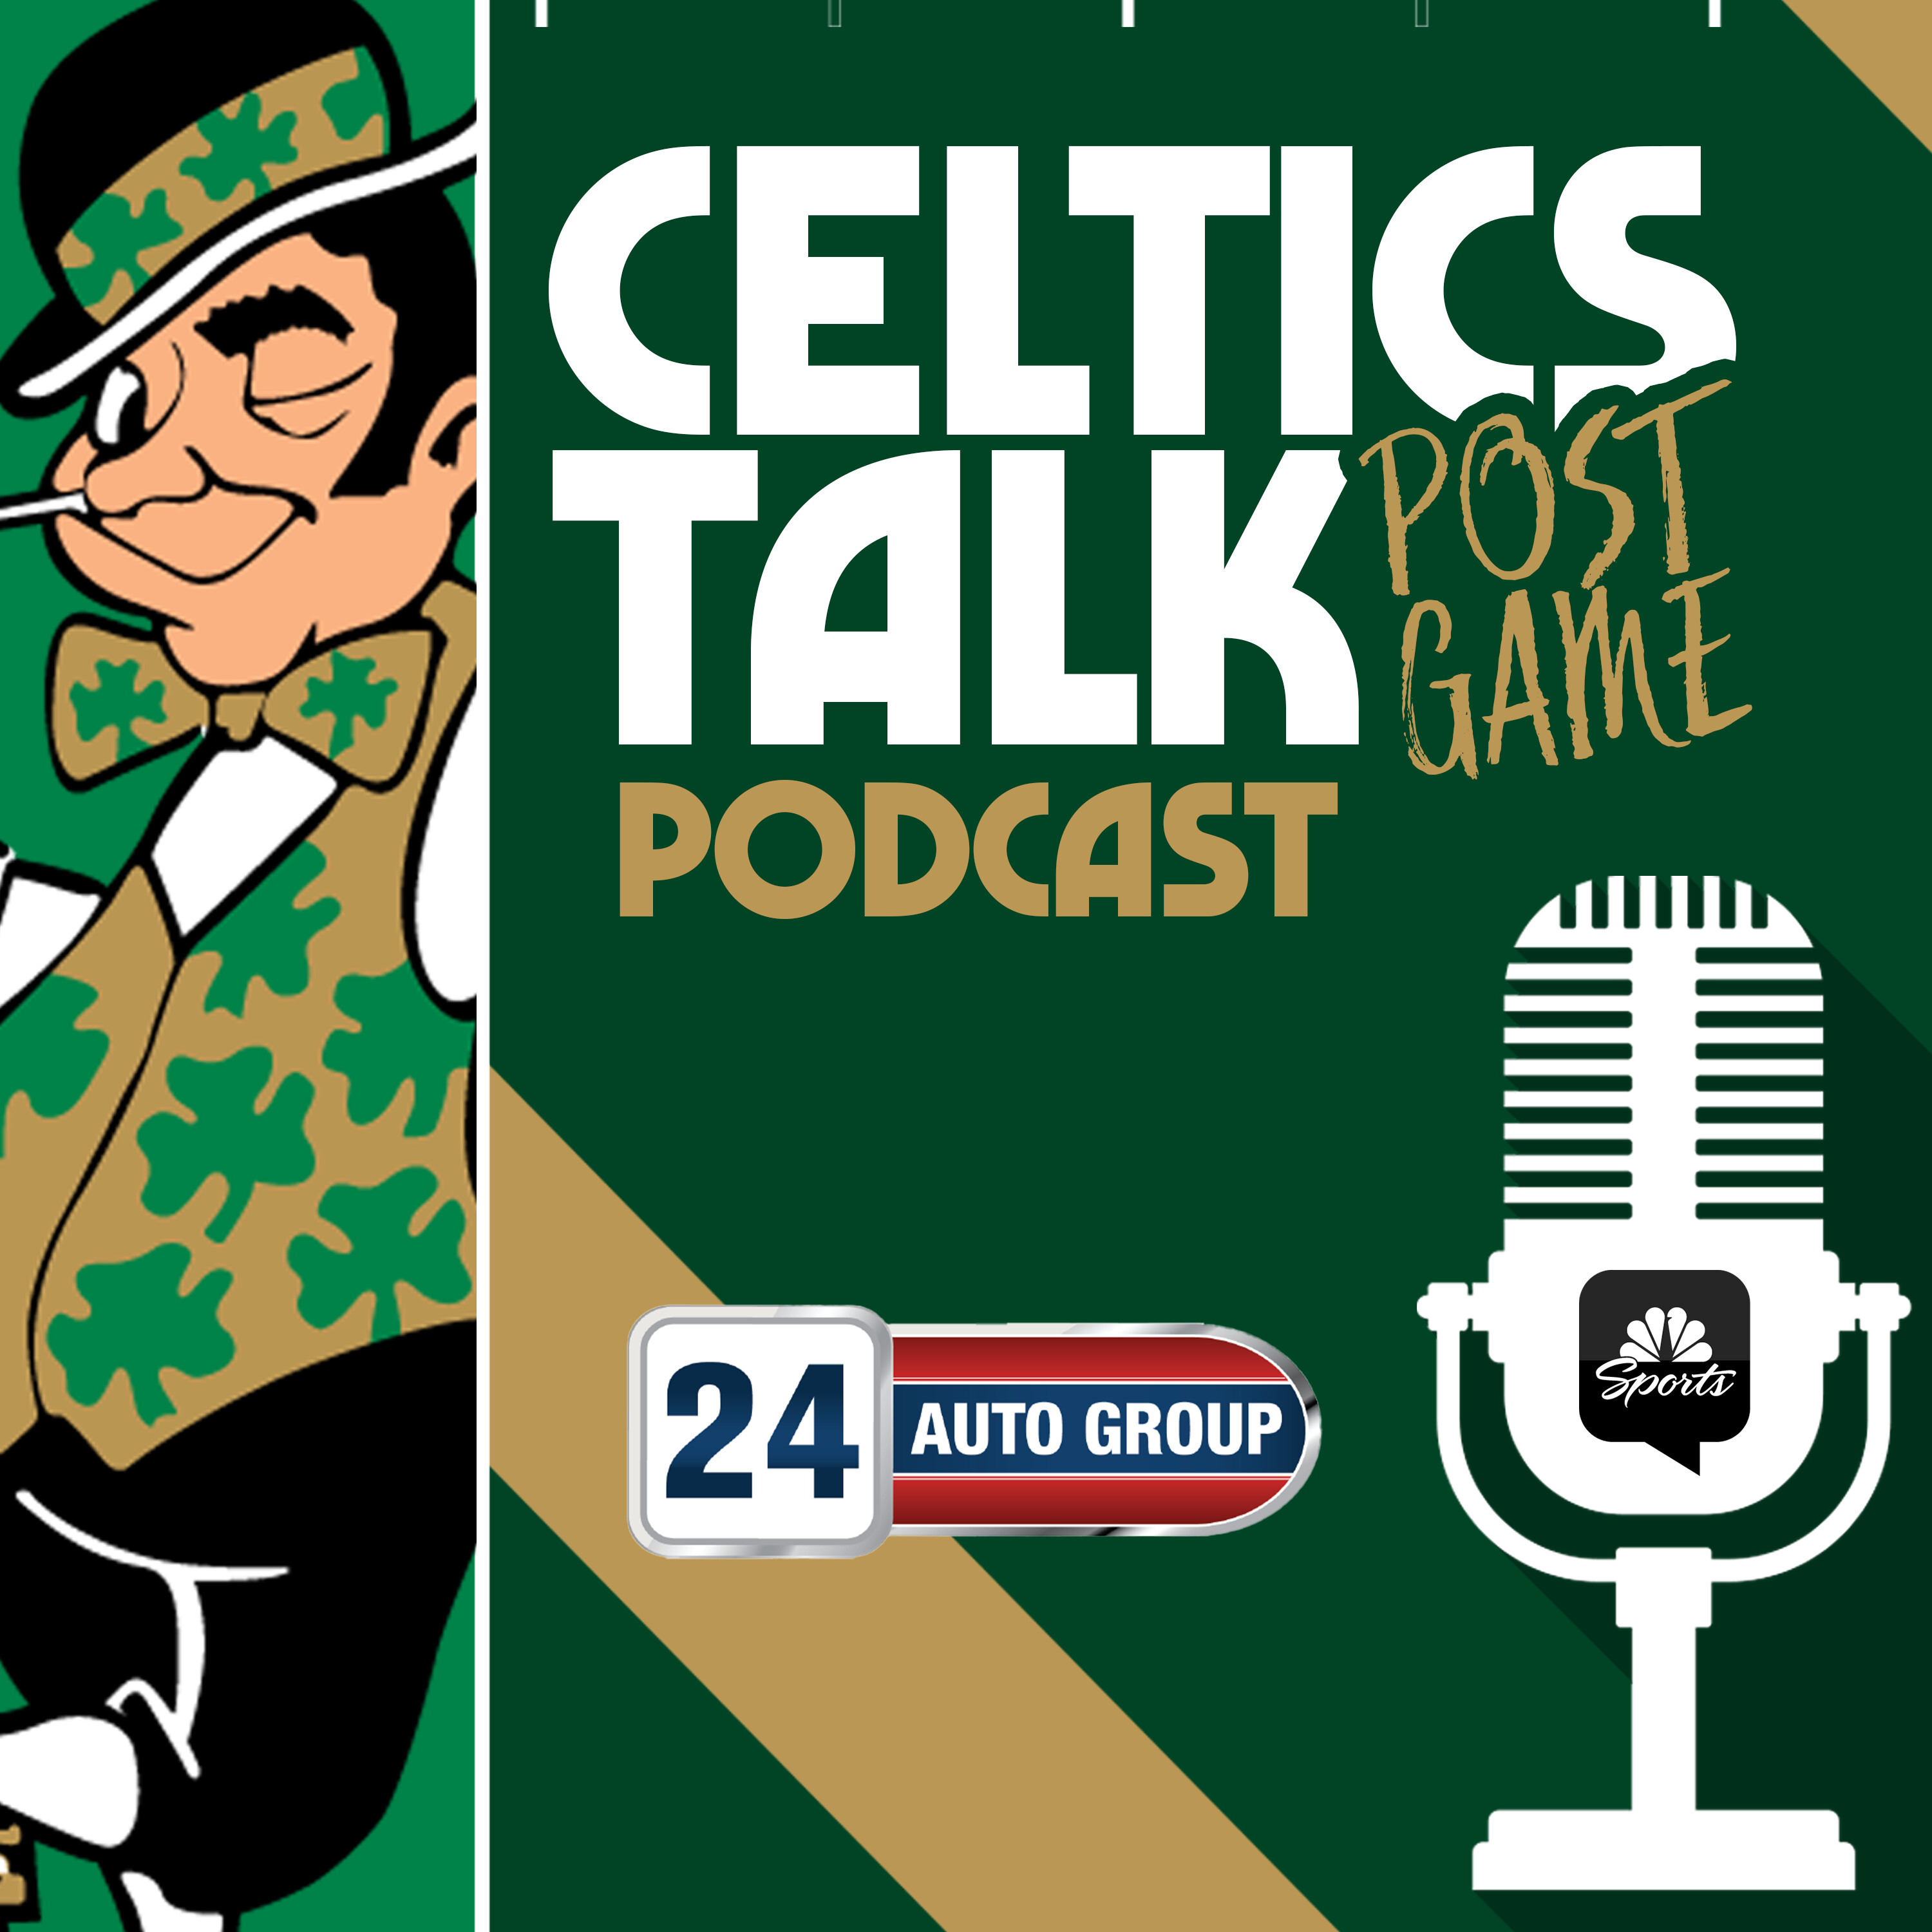 POSTGAME POD: Celtics suffer frustrating loss to Golden State Warriors in NBA Finals rematch